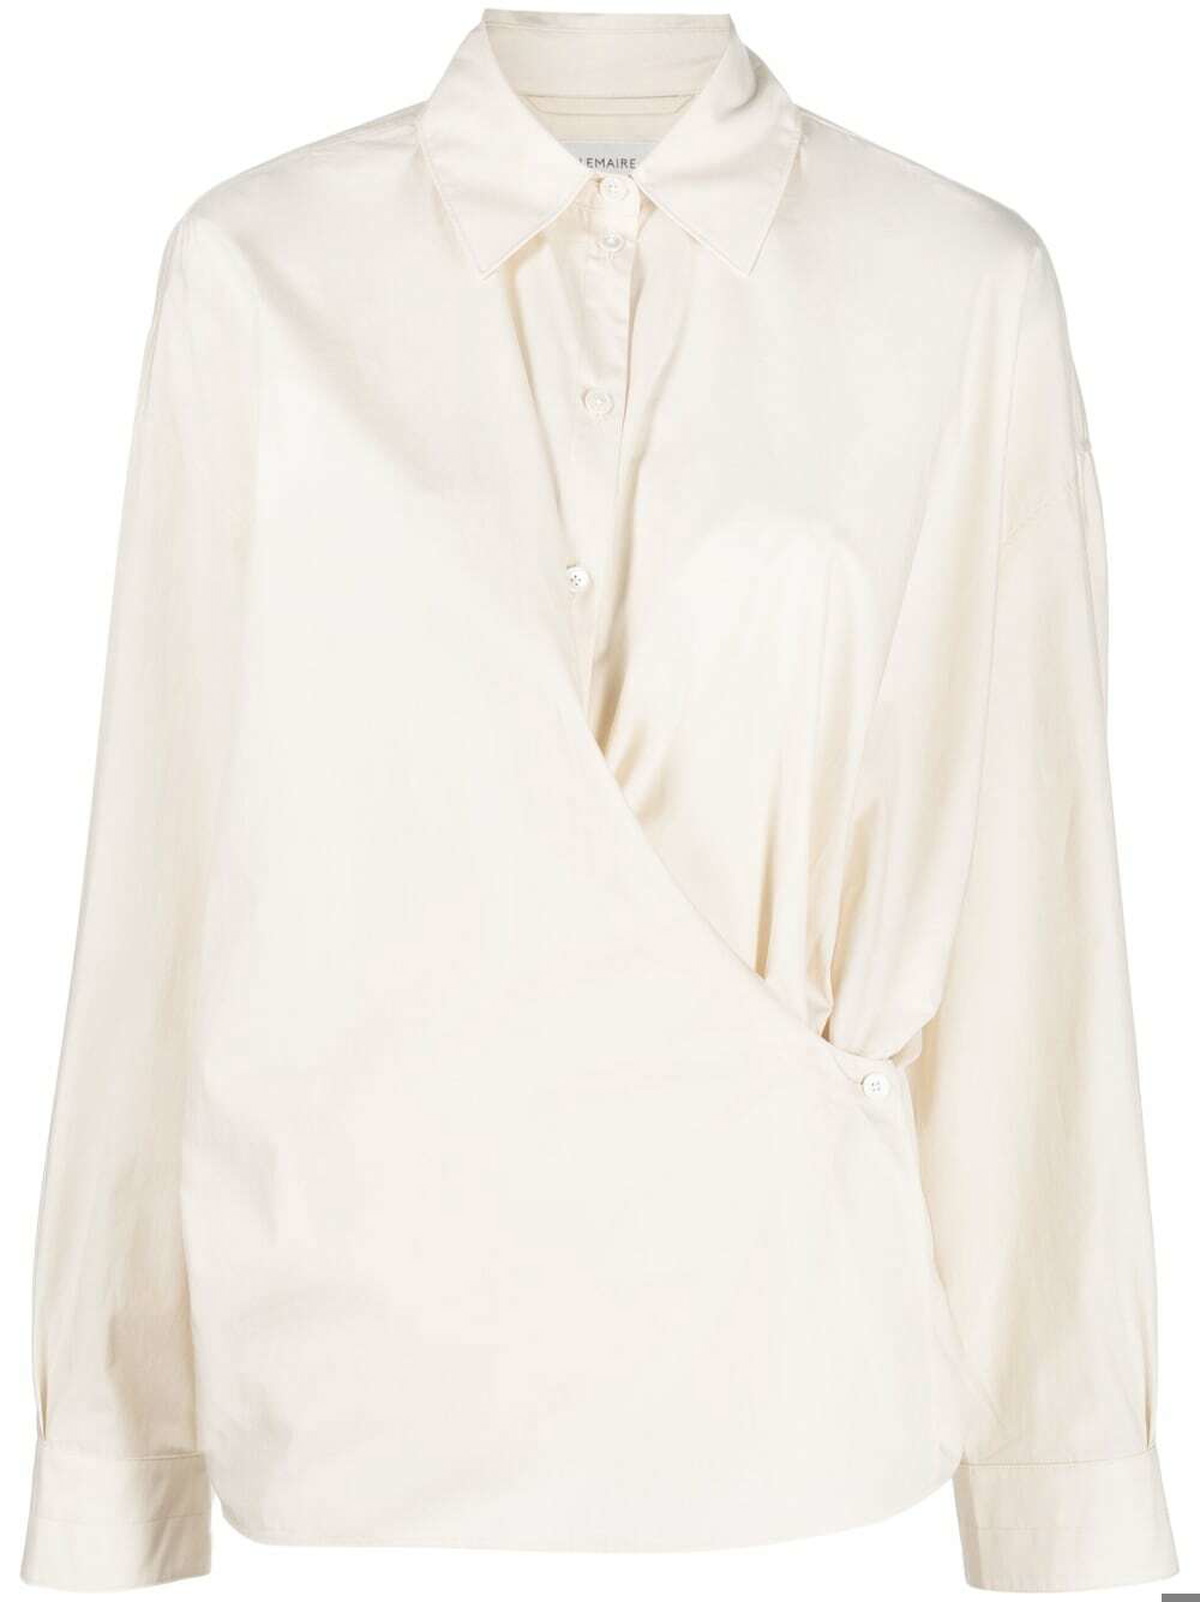 LEMAIRE - Twisted Cotton Shirt Lemaire